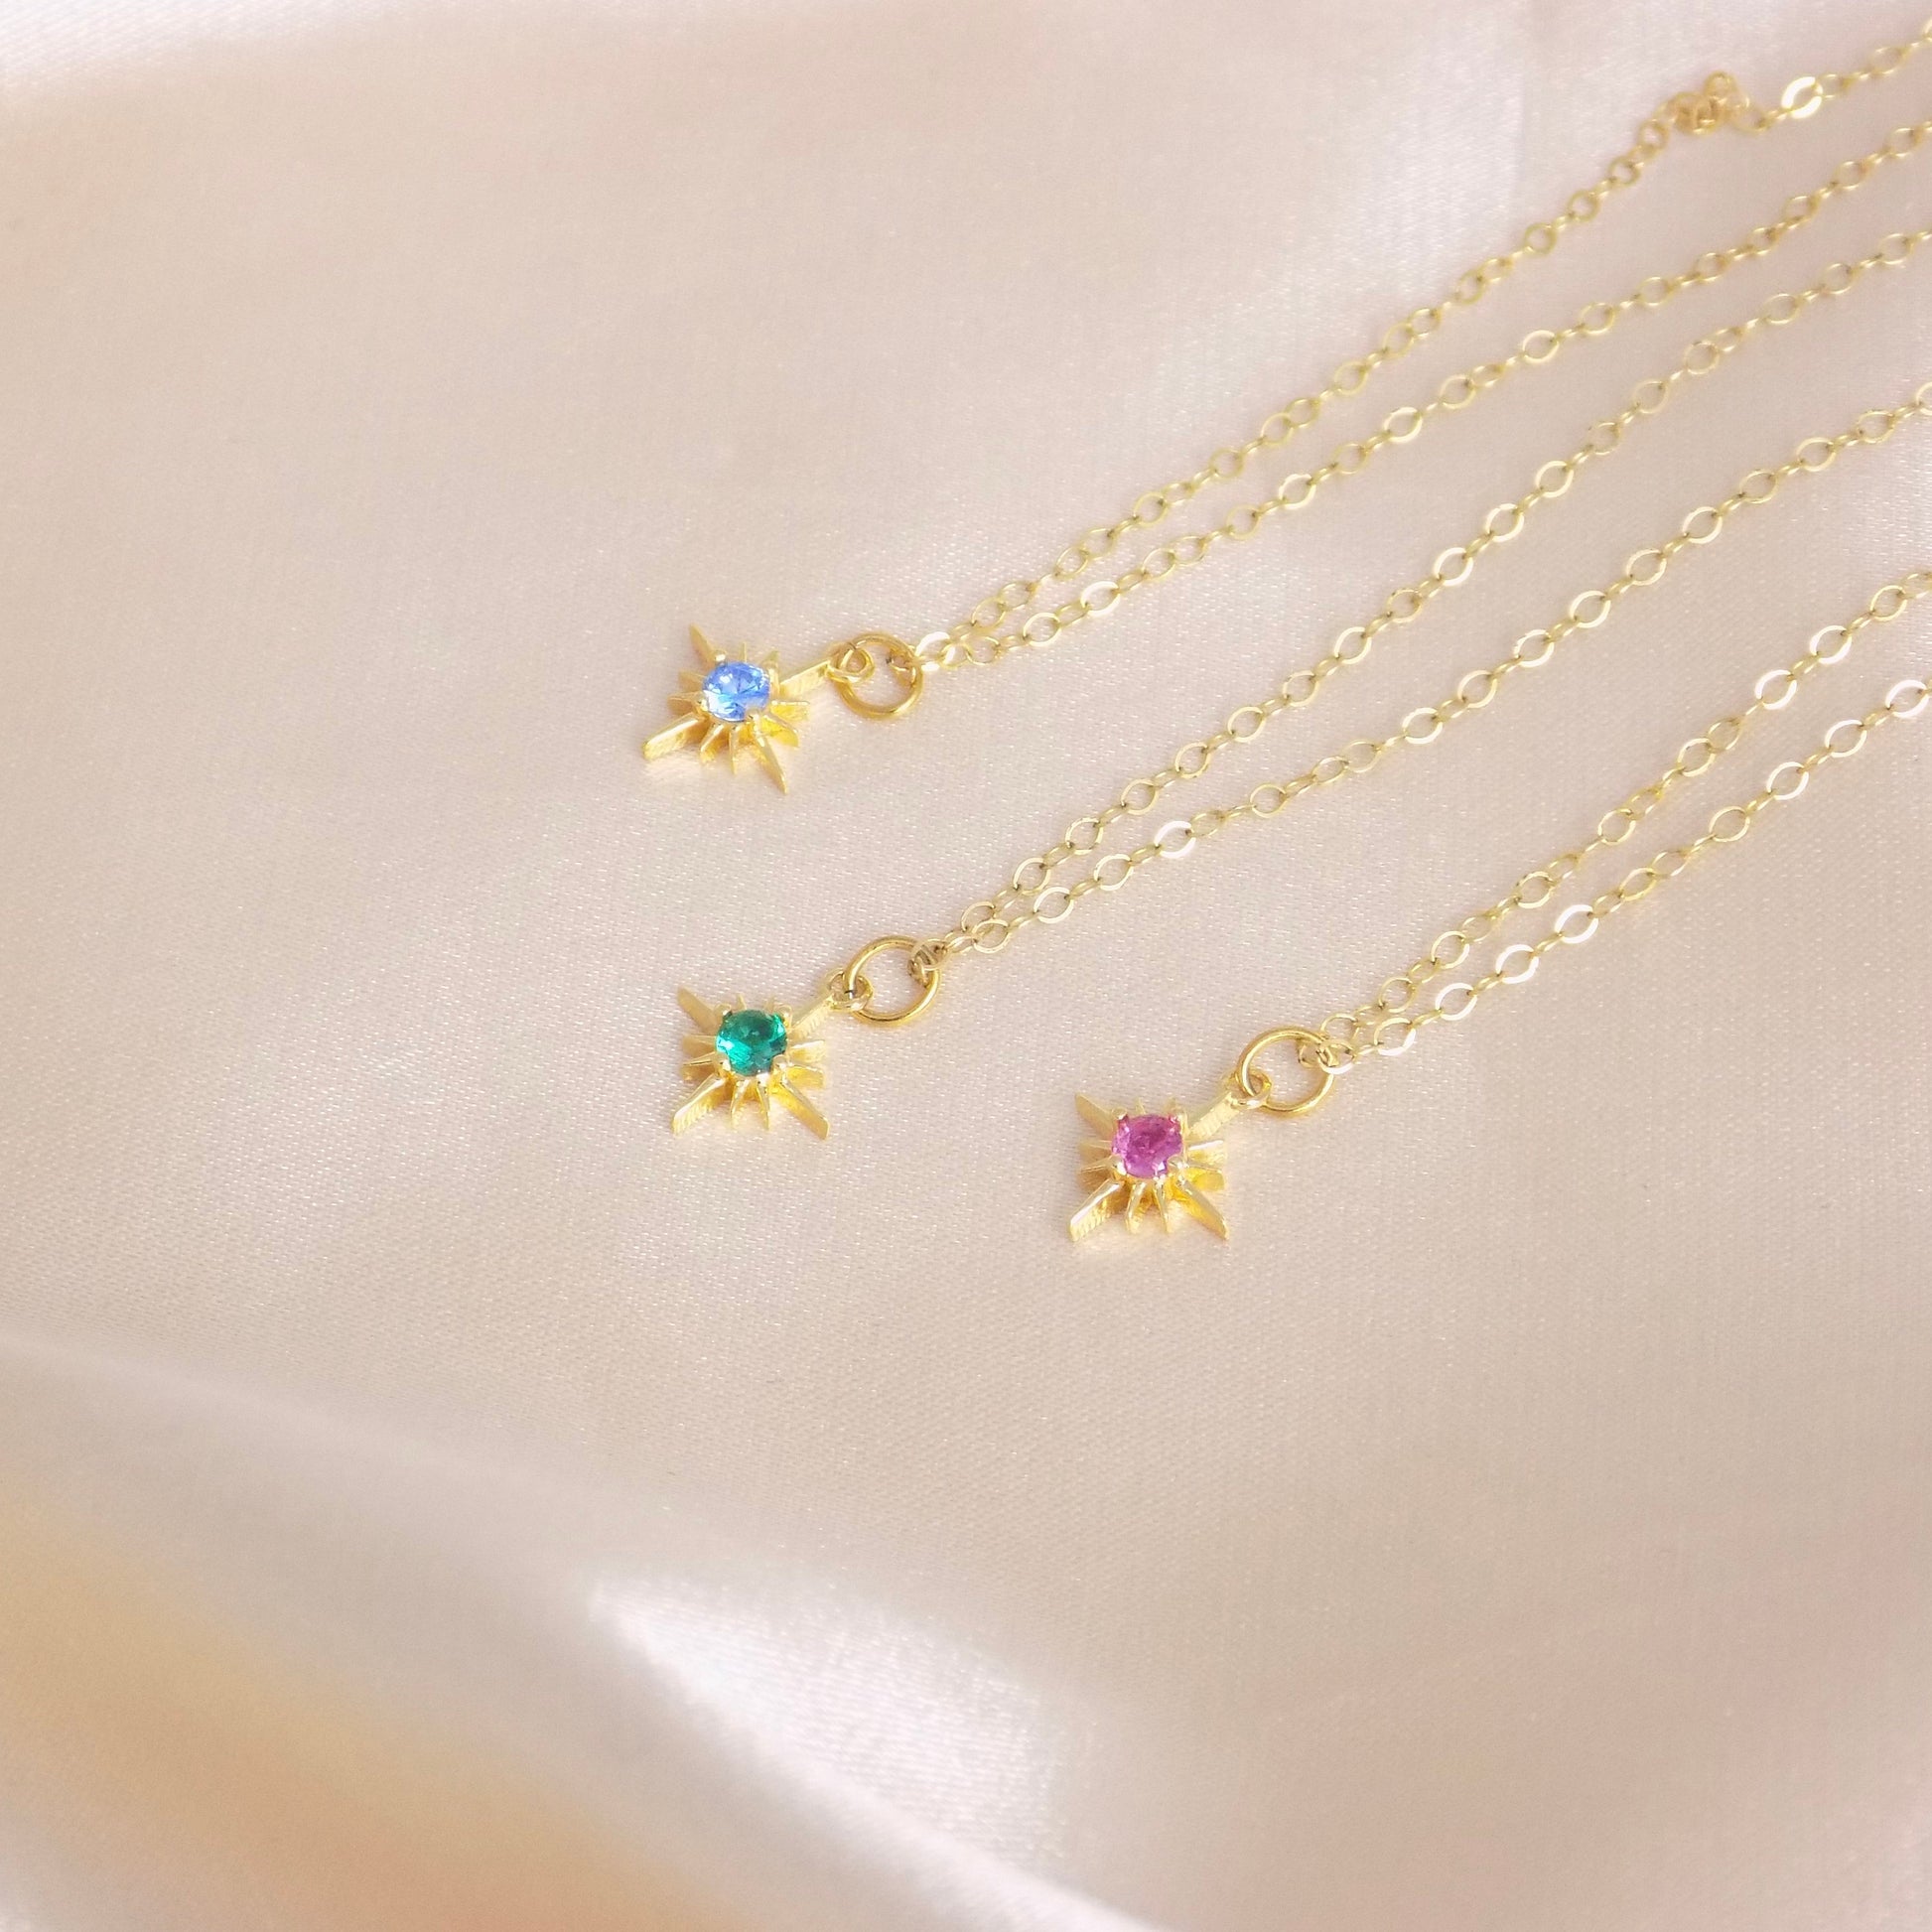 Tiny Birthstone Necklace, Colorful Starburst Charm, Customized Birthday Gift For Her, M6-791